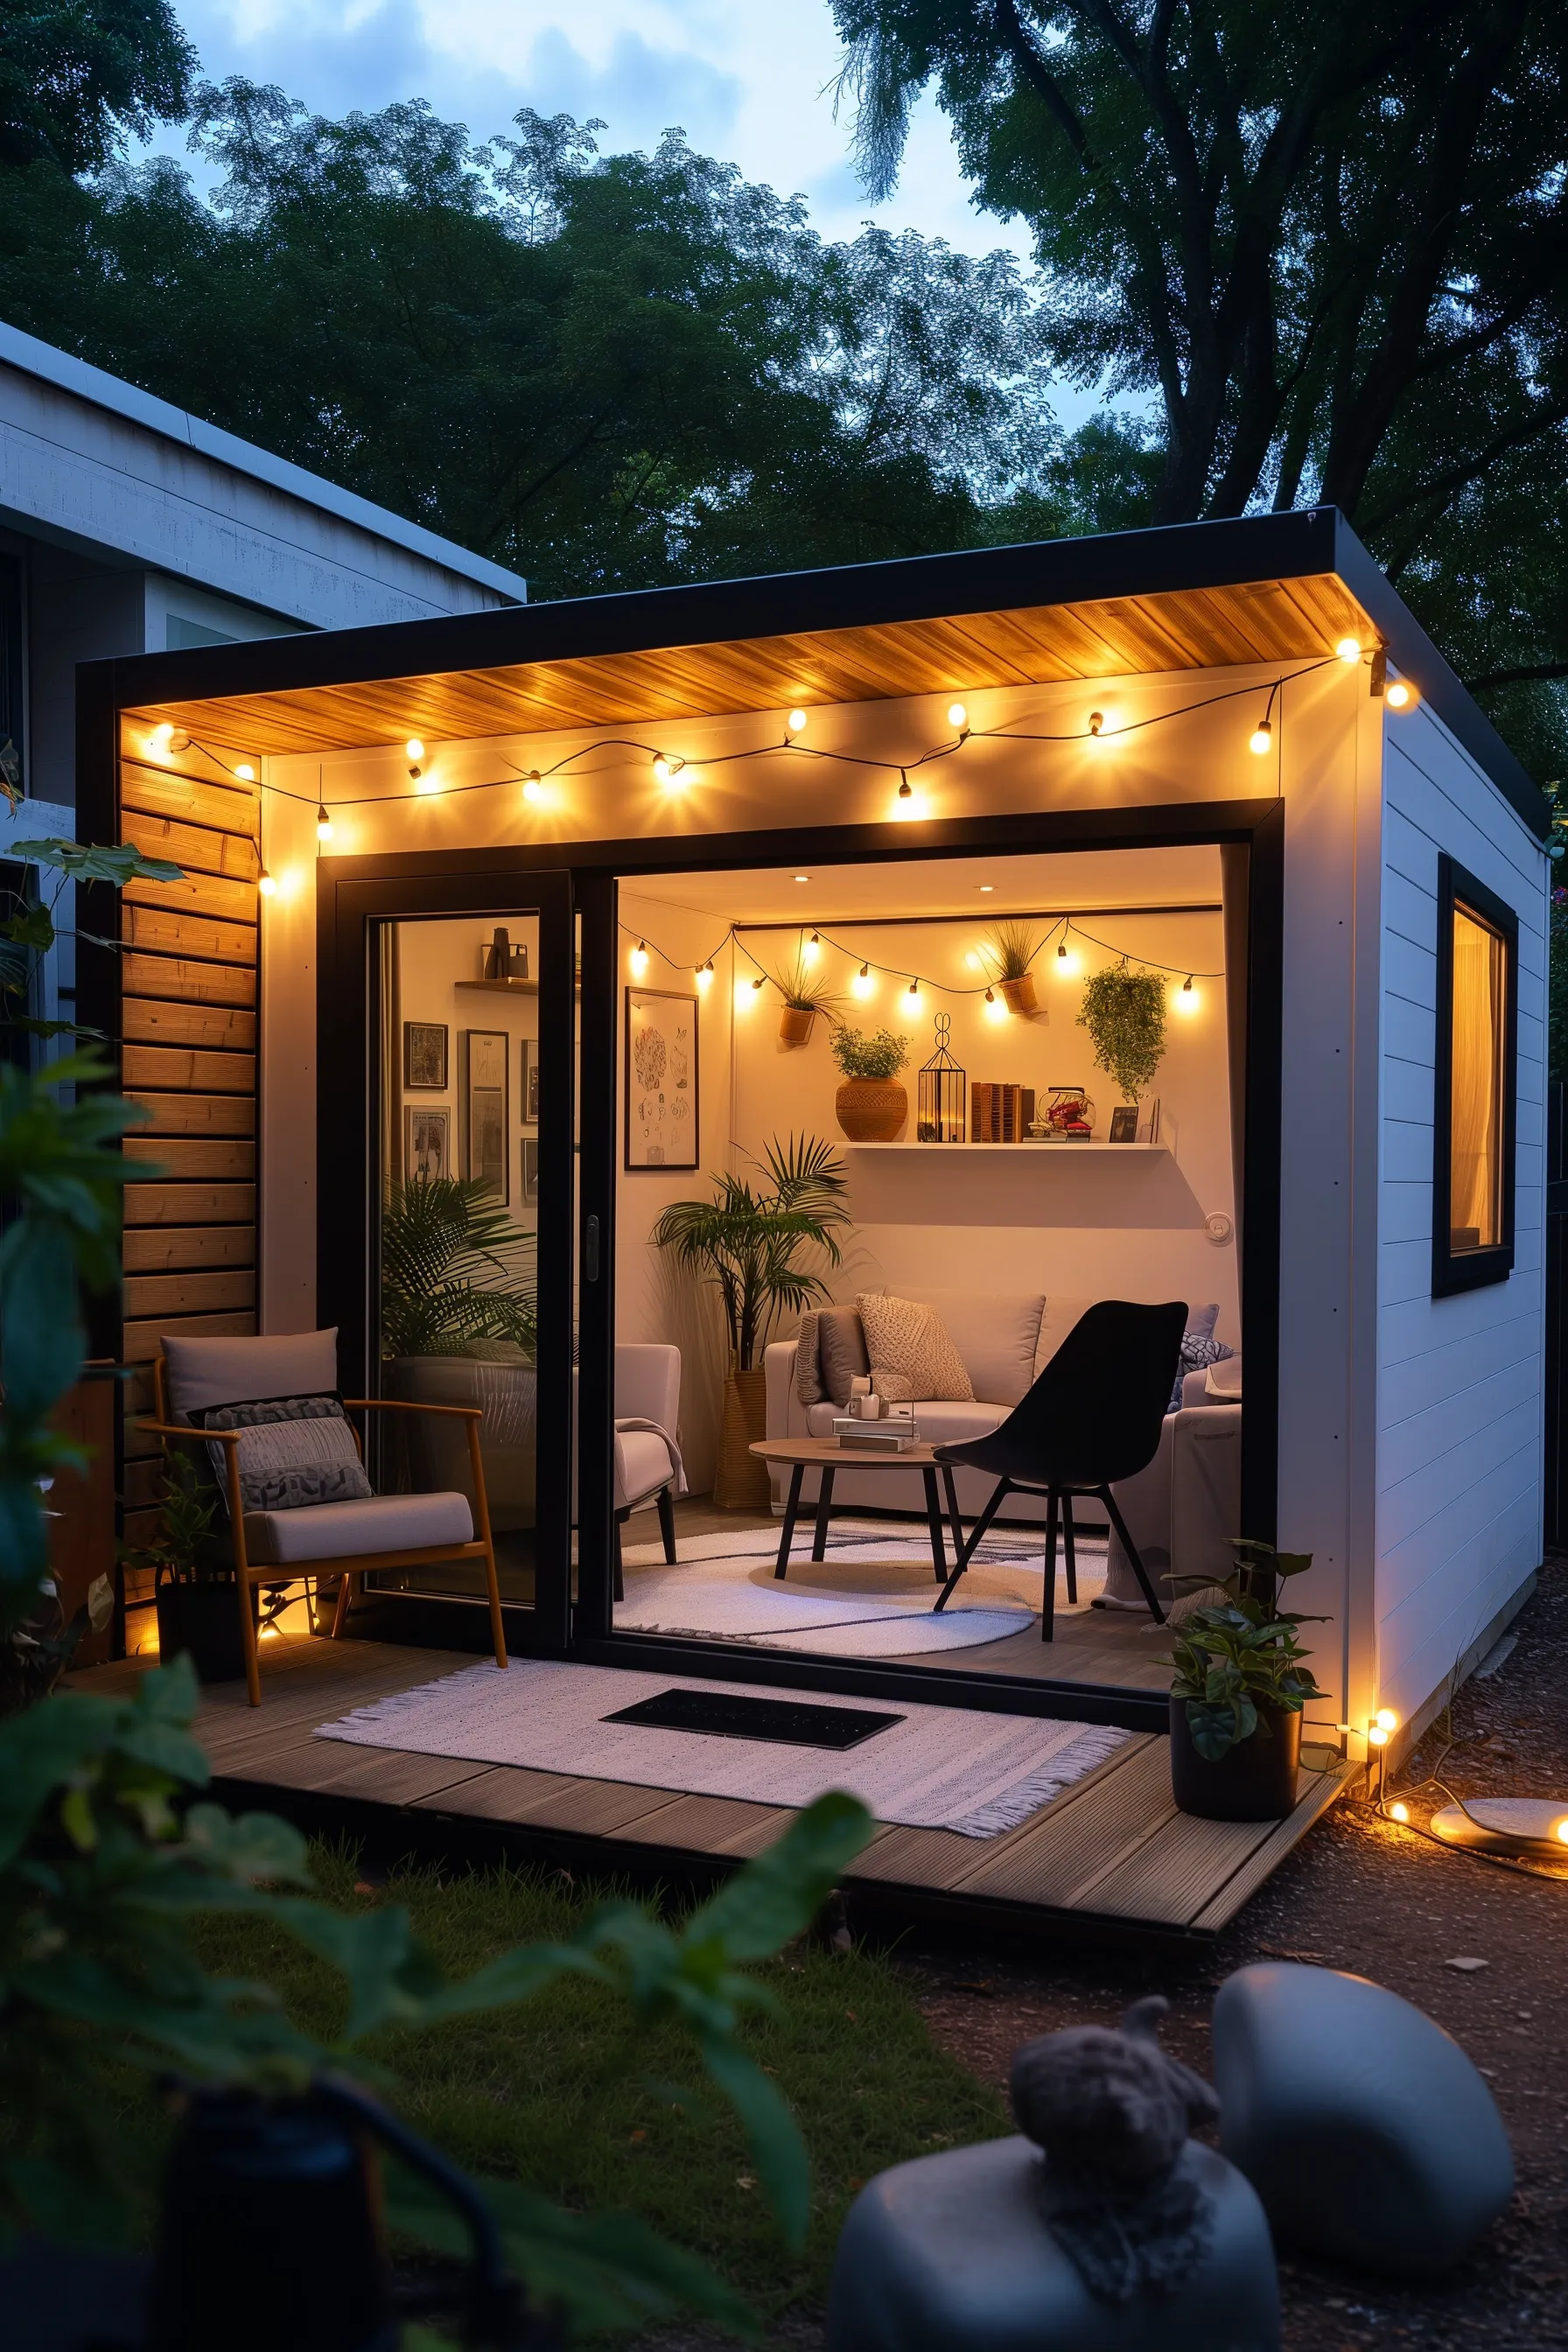 A man cave shed with fairy lights